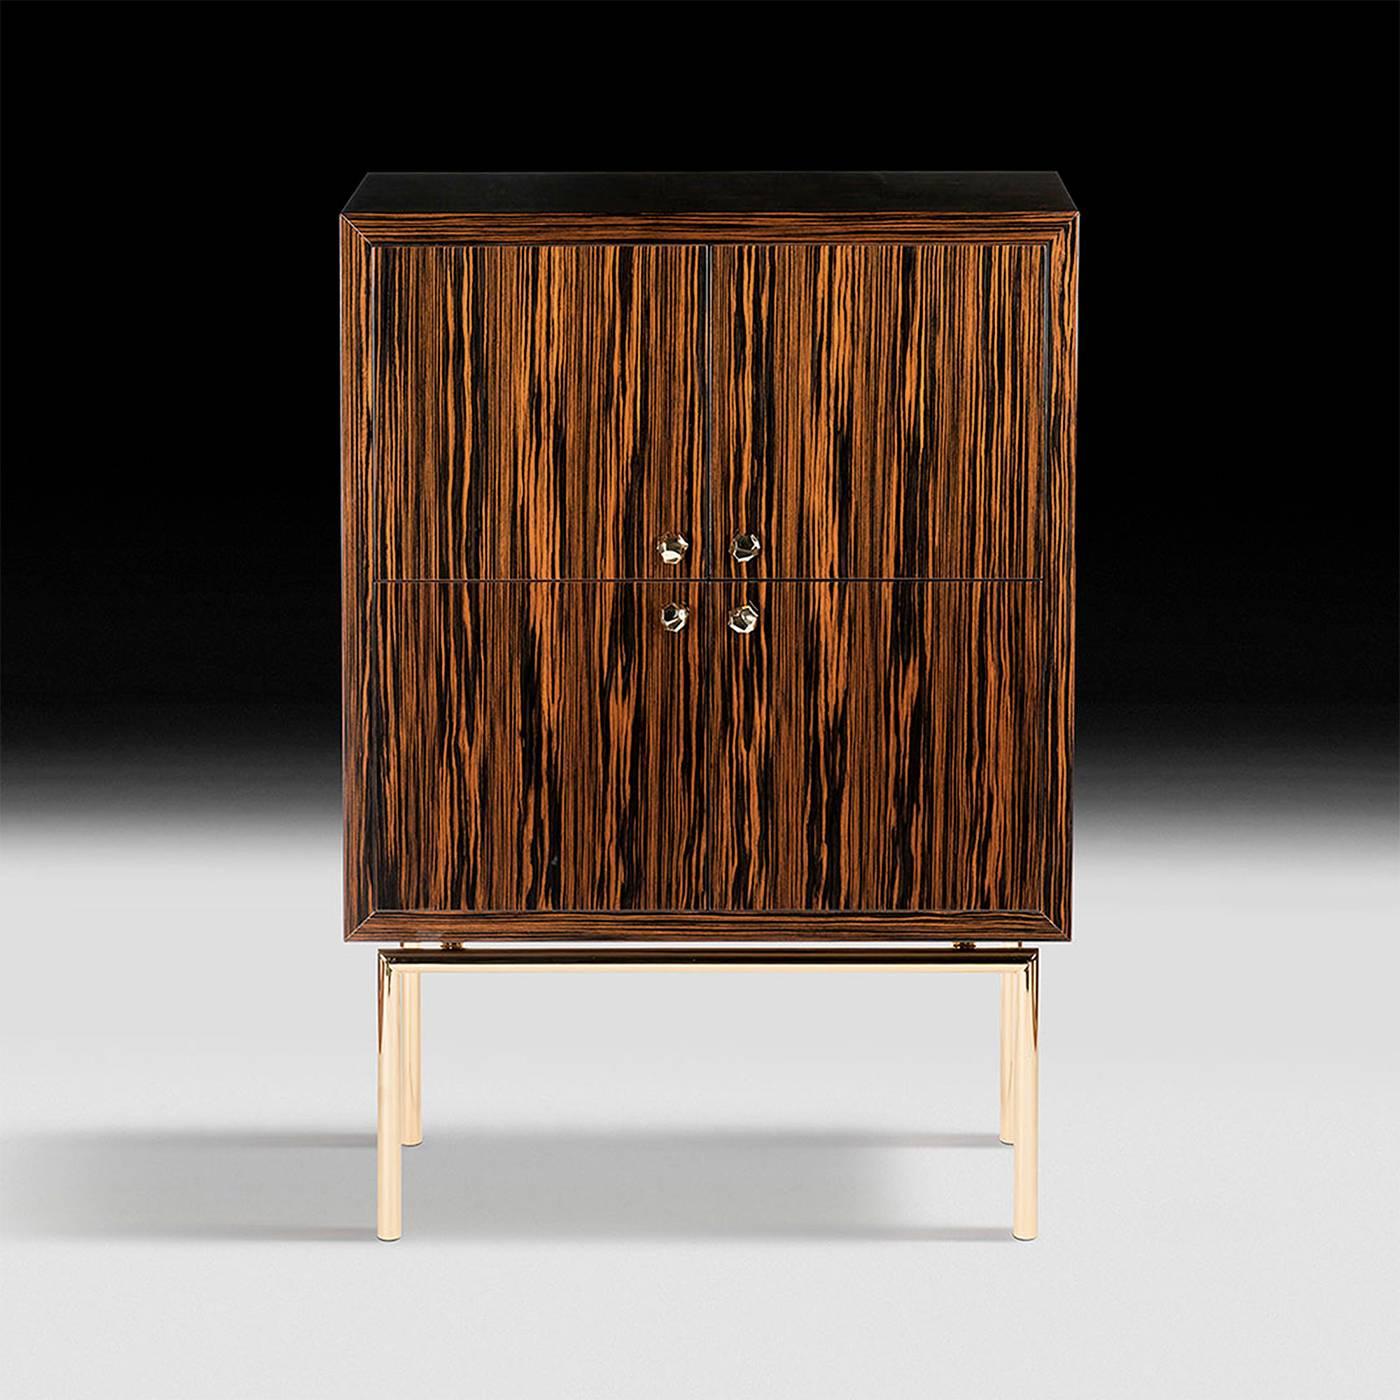 This exquisite piece is part of the Original Sin collection designed by Giorgio Ragazzini. The luxurious feel of this cabinet, with its ebony wood with a glossy finish and the metal structure with a precious coat of 24-karat gold, matches the other